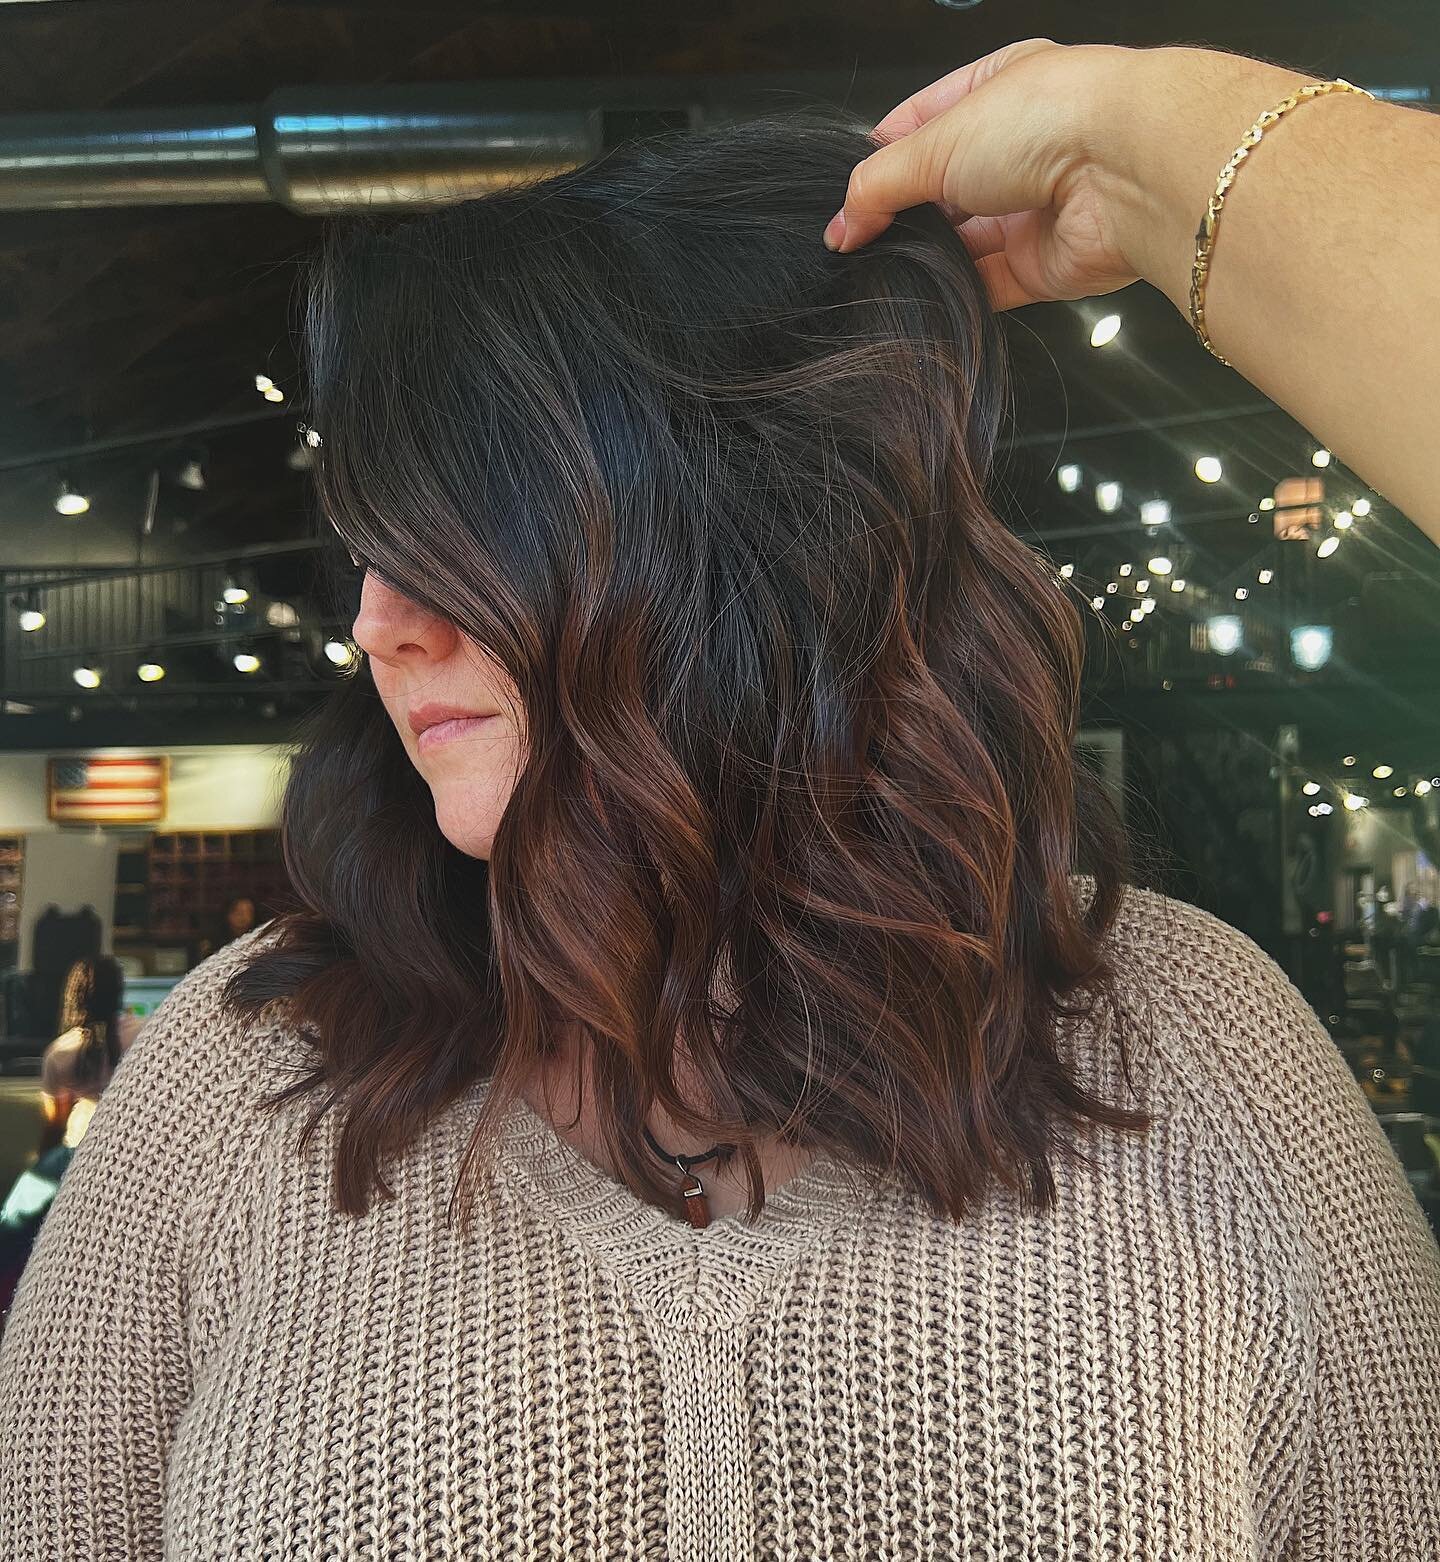 Chocolate vibe 🤤🤎🍂
- - - -

#stlstylist #stlhairstylist #stlhairsalon #stlhaircut #webstergrovesmo #websteruniversity #salonblvd #stlmodel #stlcolorist #brownhaircolor #hairtutorial #hairtrends #hairtips #brownhairstl